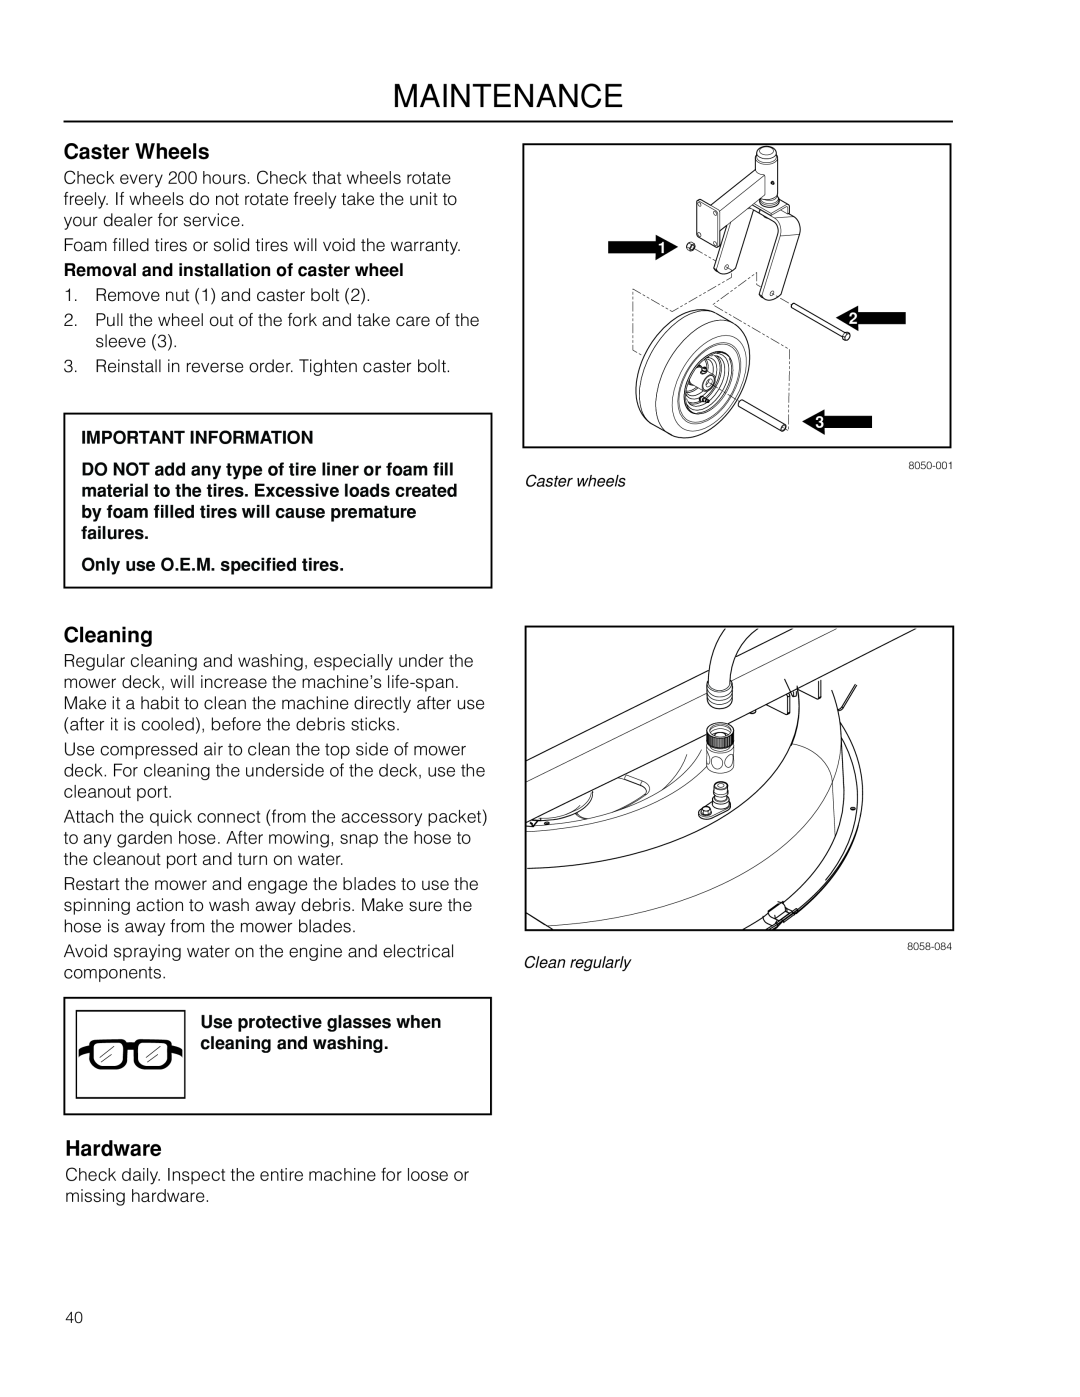 McCulloch ZM3016BF/966564001 Caster Wheels, Cleaning, Hardware, Removal and installation of caster wheel, Maintenance 